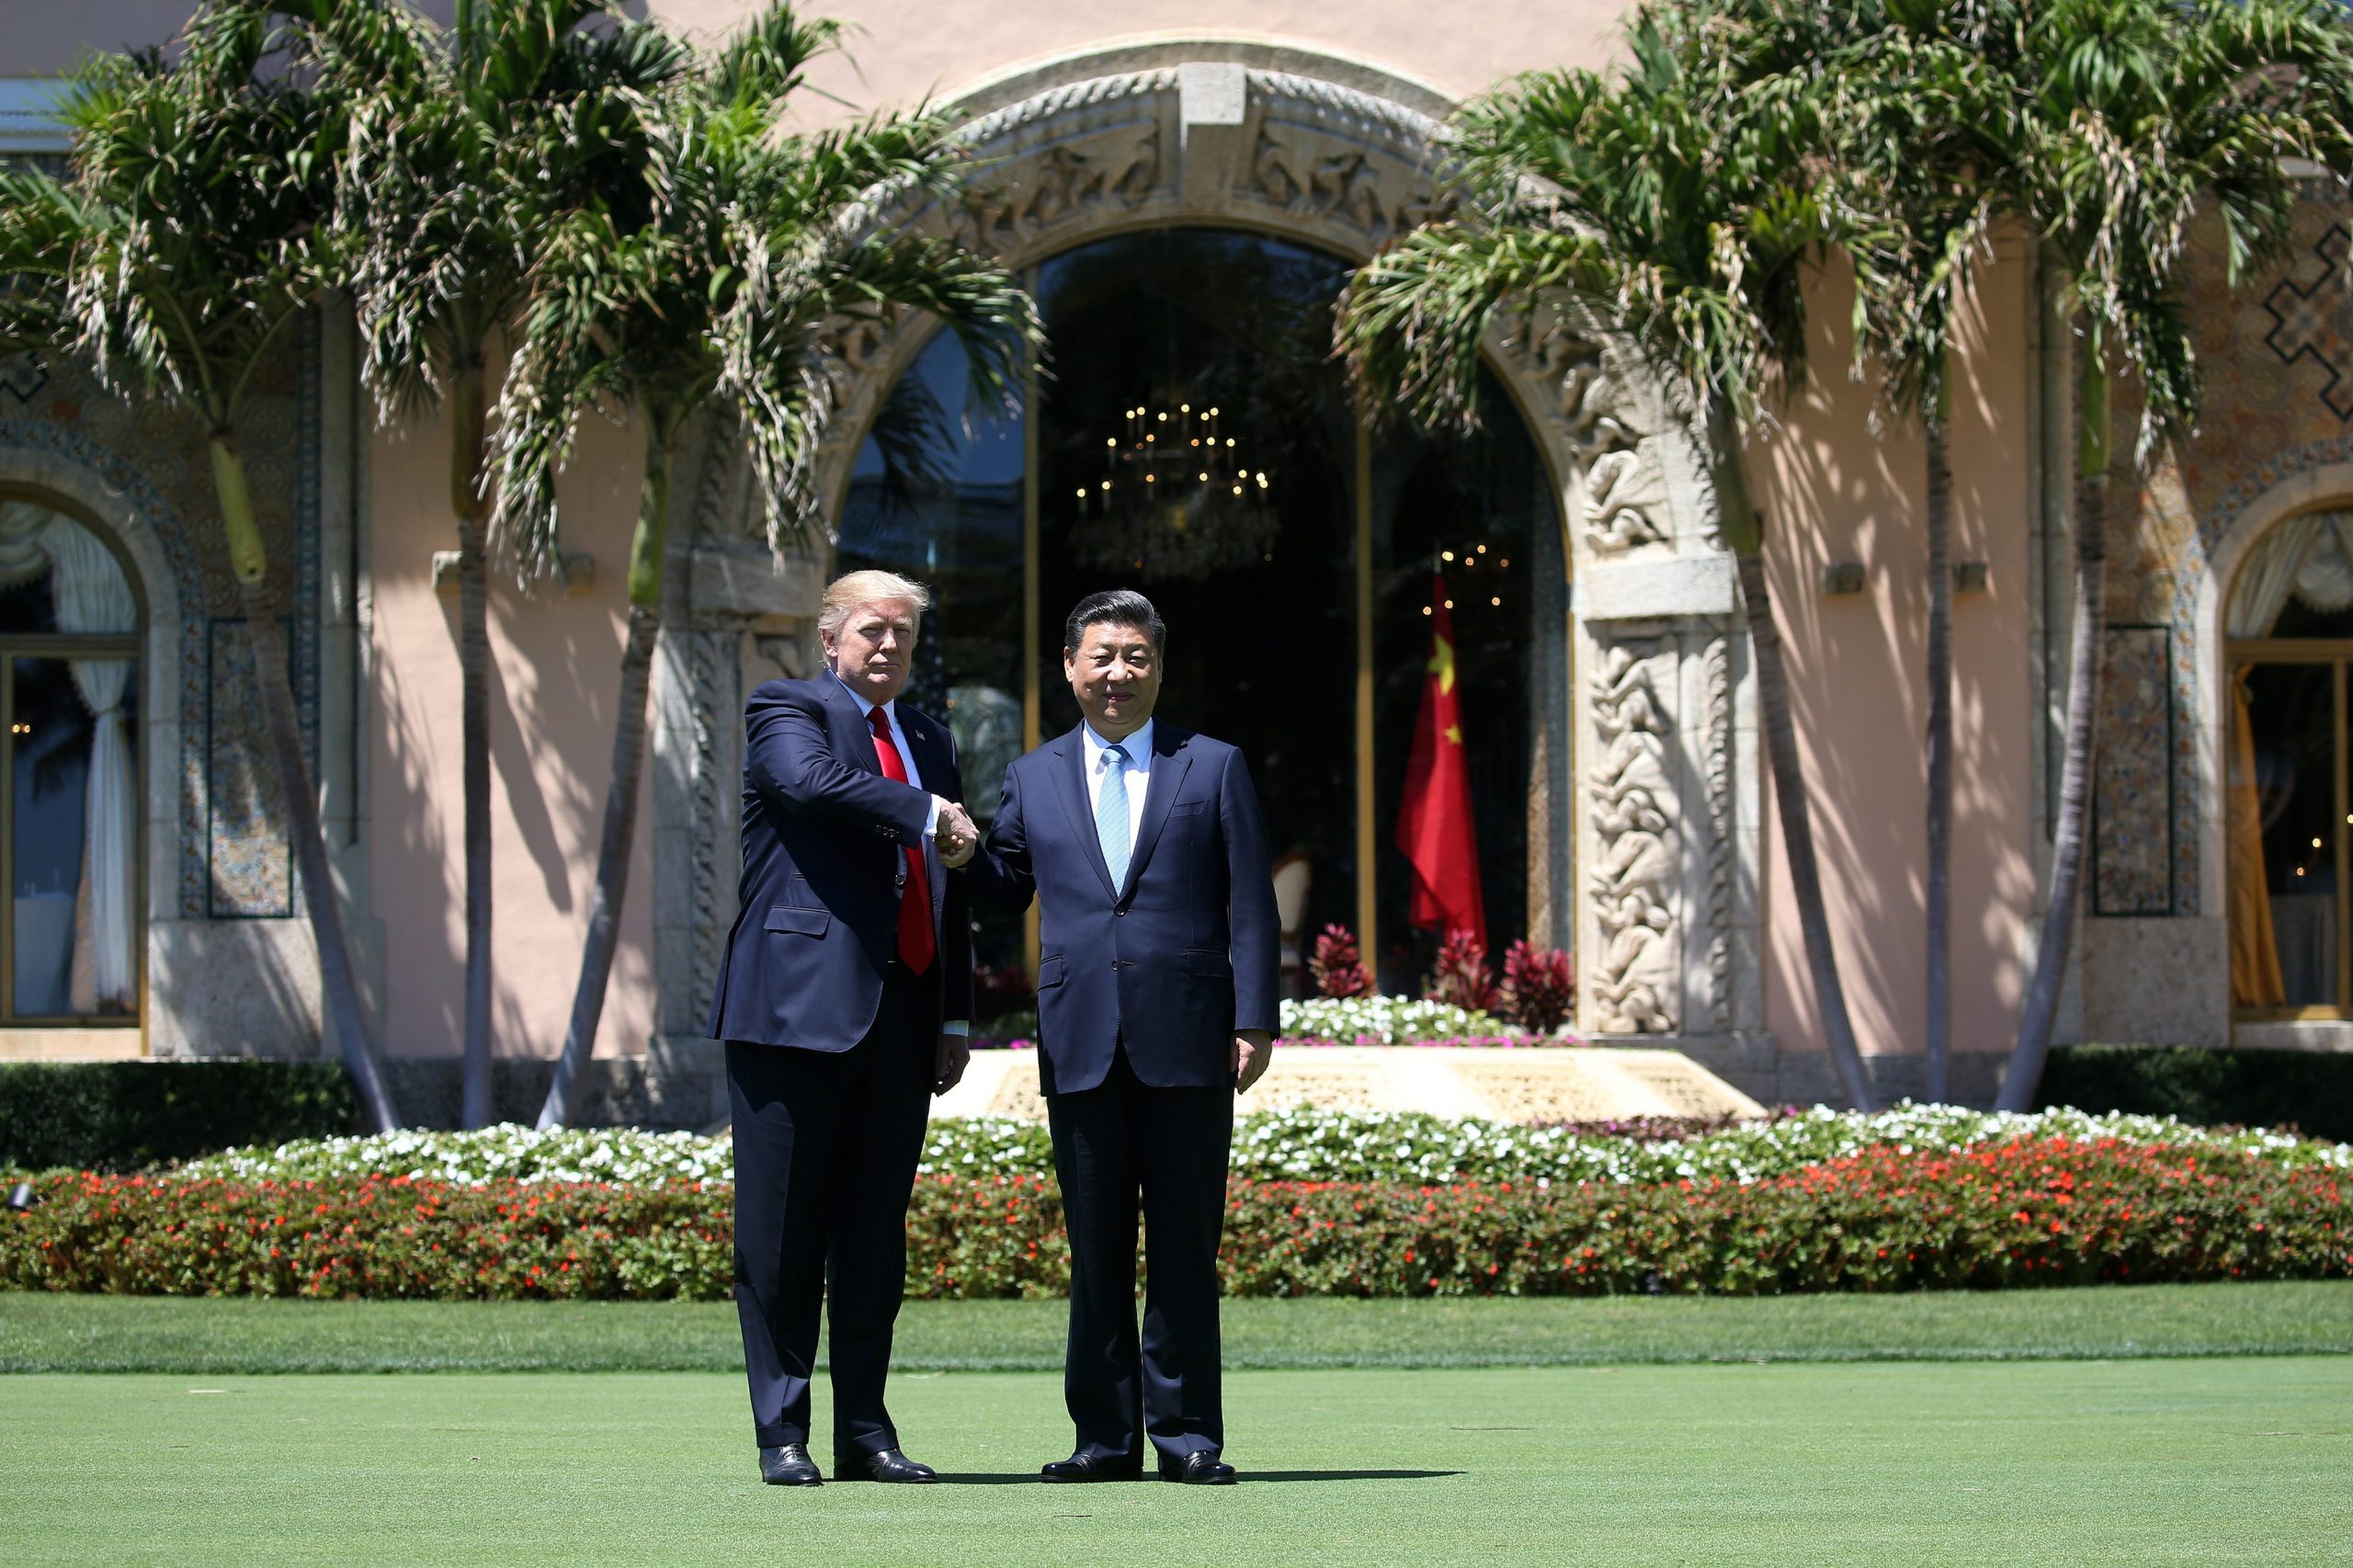 Trump shakes hands with China's President Xi Jinping outside Mar-a-Lago